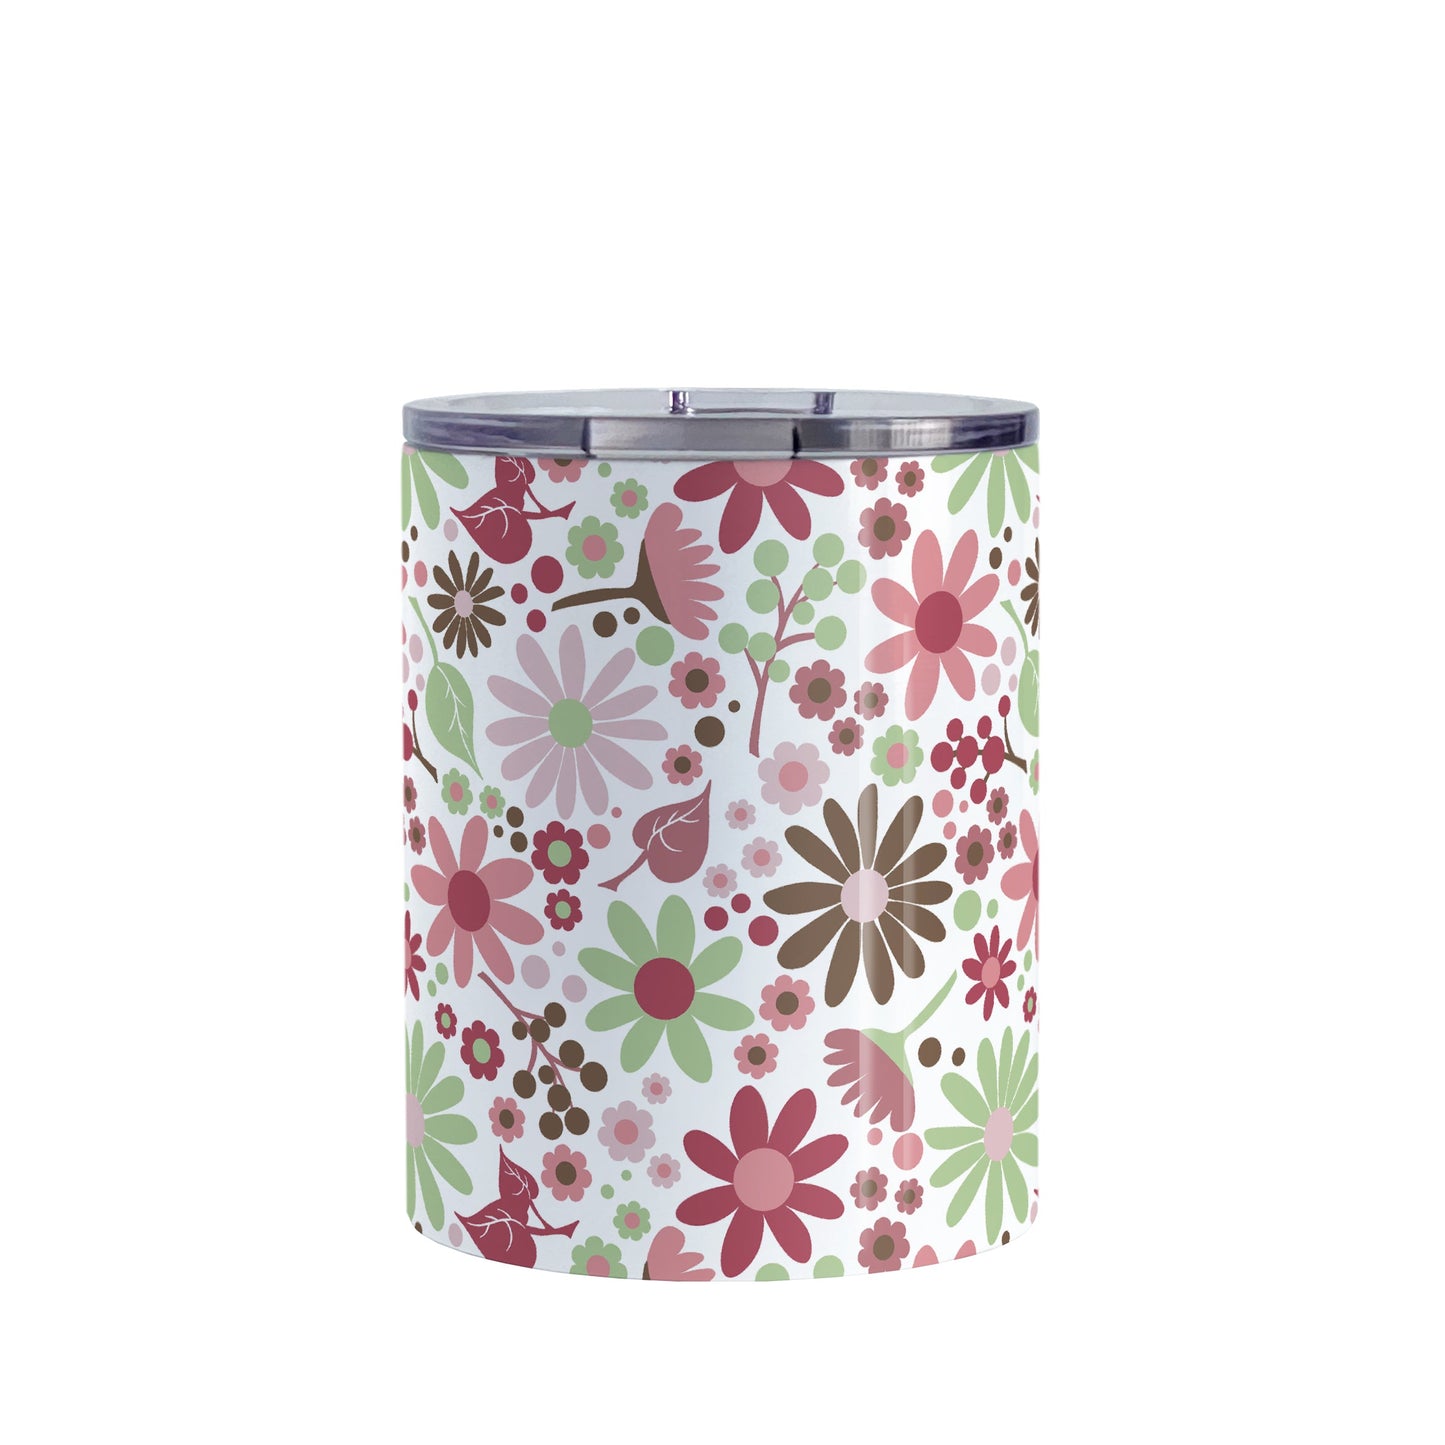 Berry Green Summer Flowers Tumbler Cup (10oz, stainless steel insulated) at Amy's Coffee Mugs